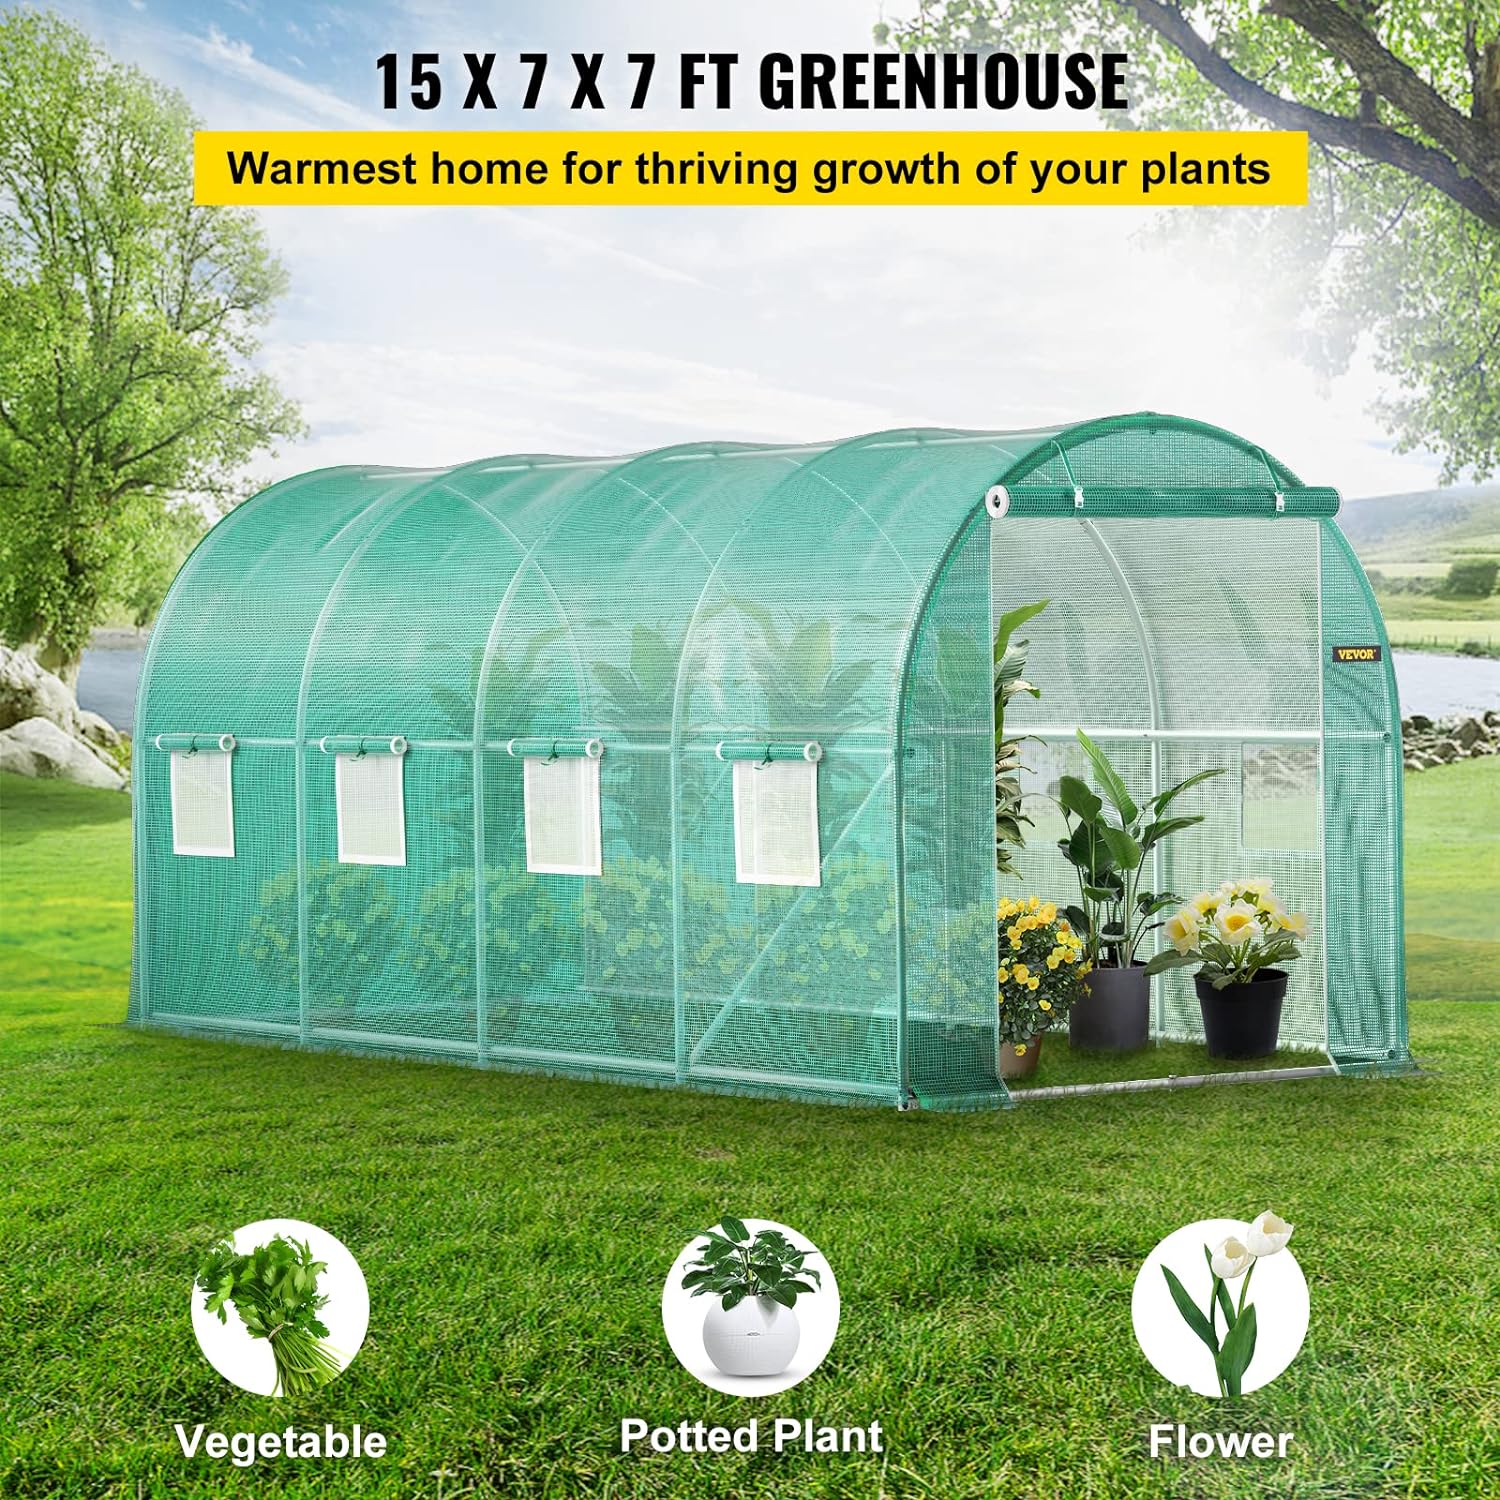 VEVOR Walk-in Tunnel Greenhouse, 15 x 7 x 7 ft Portable Plant Hot House with Galvanized Steel Hoops, 1 Top Beam, Diagonal Poles, Zippered Door  8 Roll-up Windows, Green